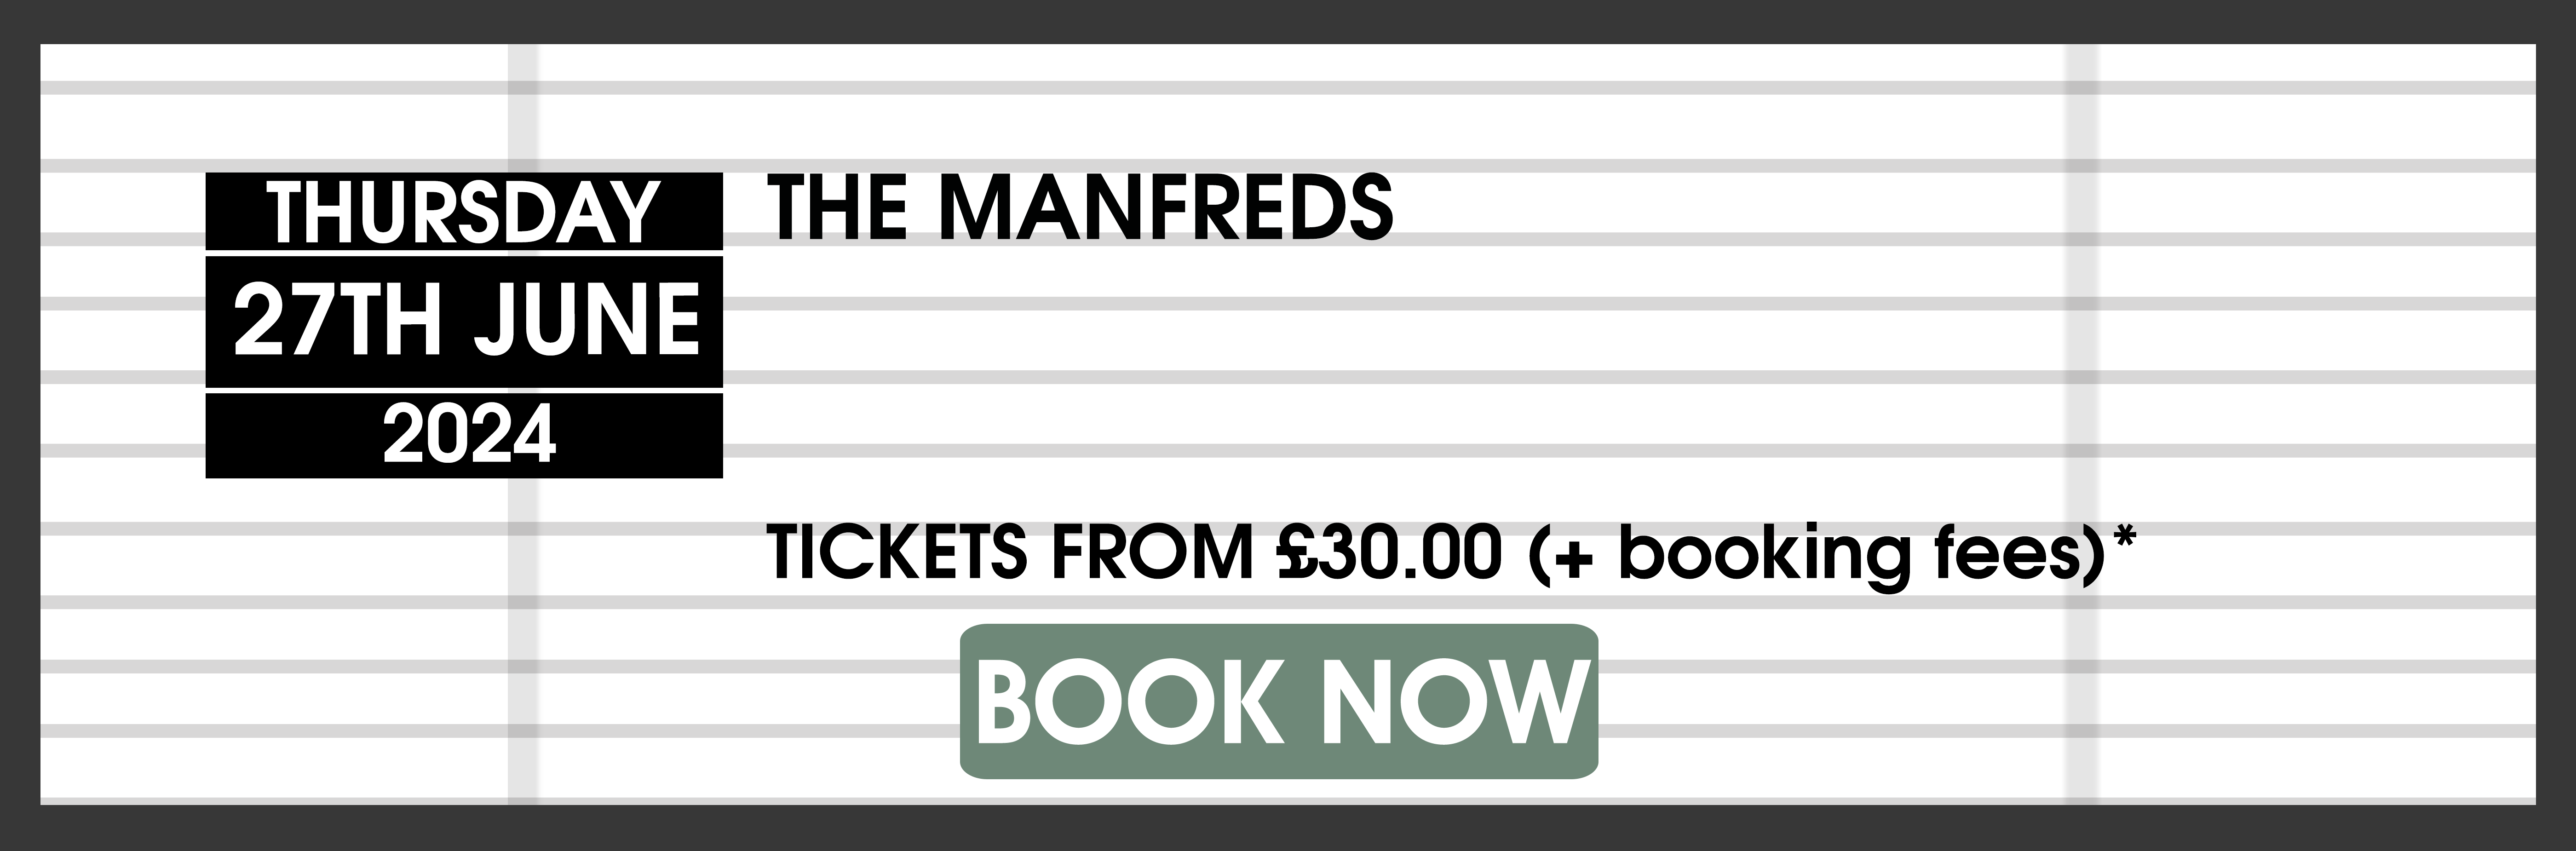 27.06.24 Manfreds BOOK NOW